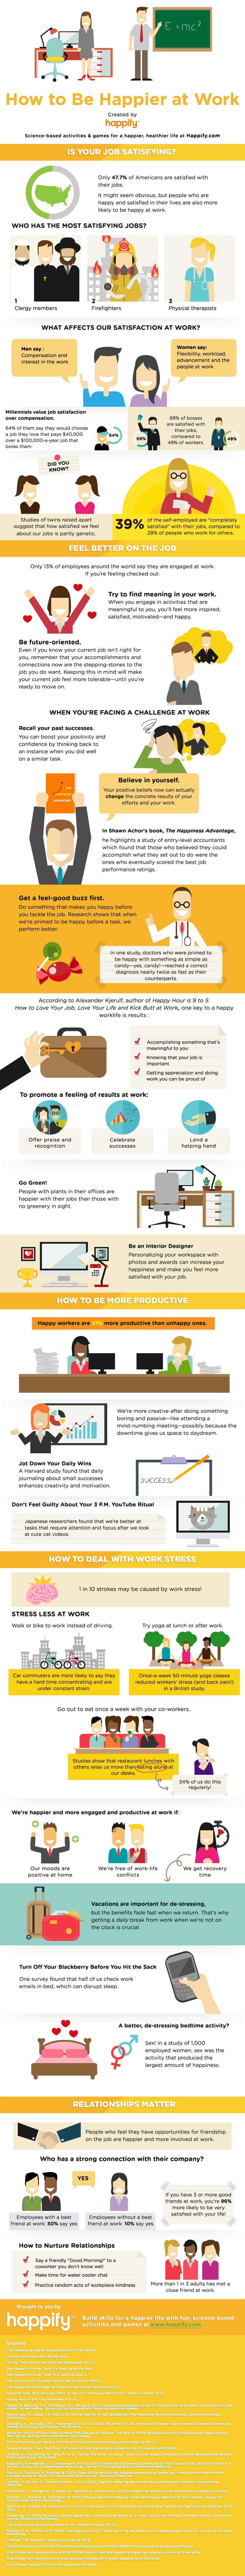 How to Be Happier At Work